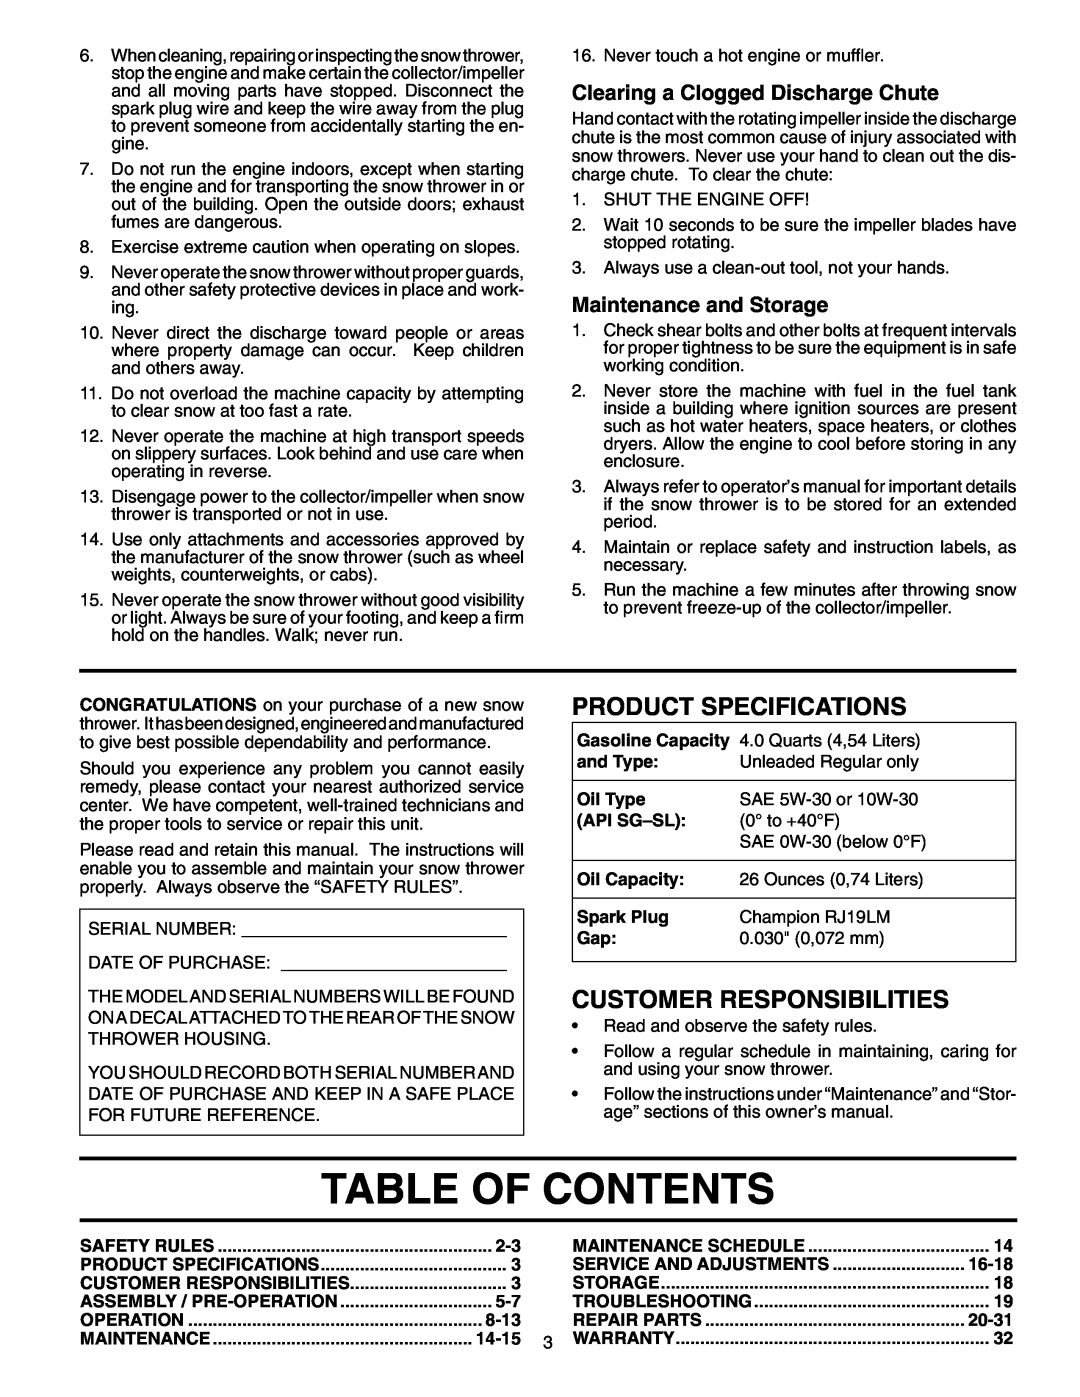 Poulan 406281 Table Of Contents, Product Specifications, Customer Responsibilities, Clearing a Clogged Discharge Chute 